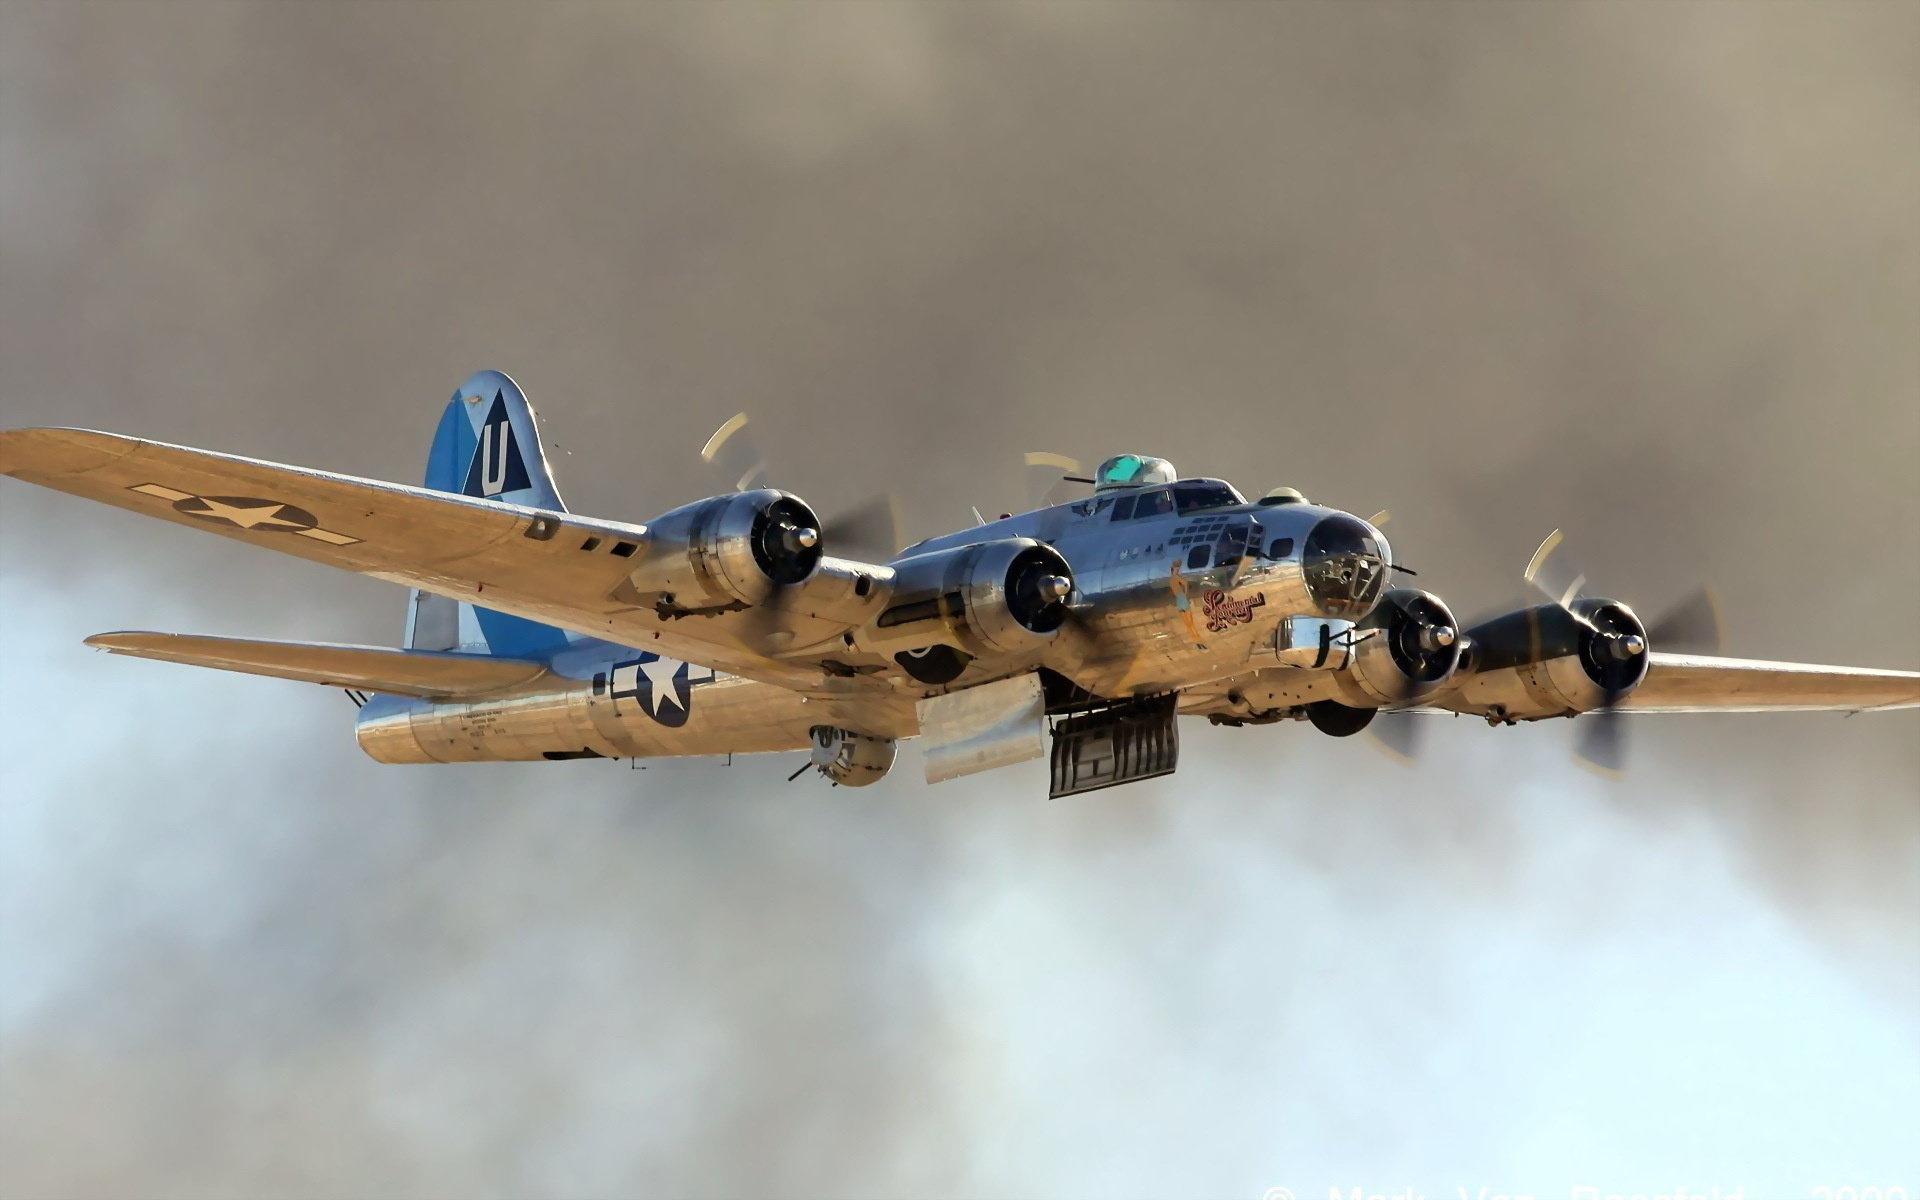 Boeing B-17 Flying Fortress wallpapers HD for desktop backgrounds 1920x1200